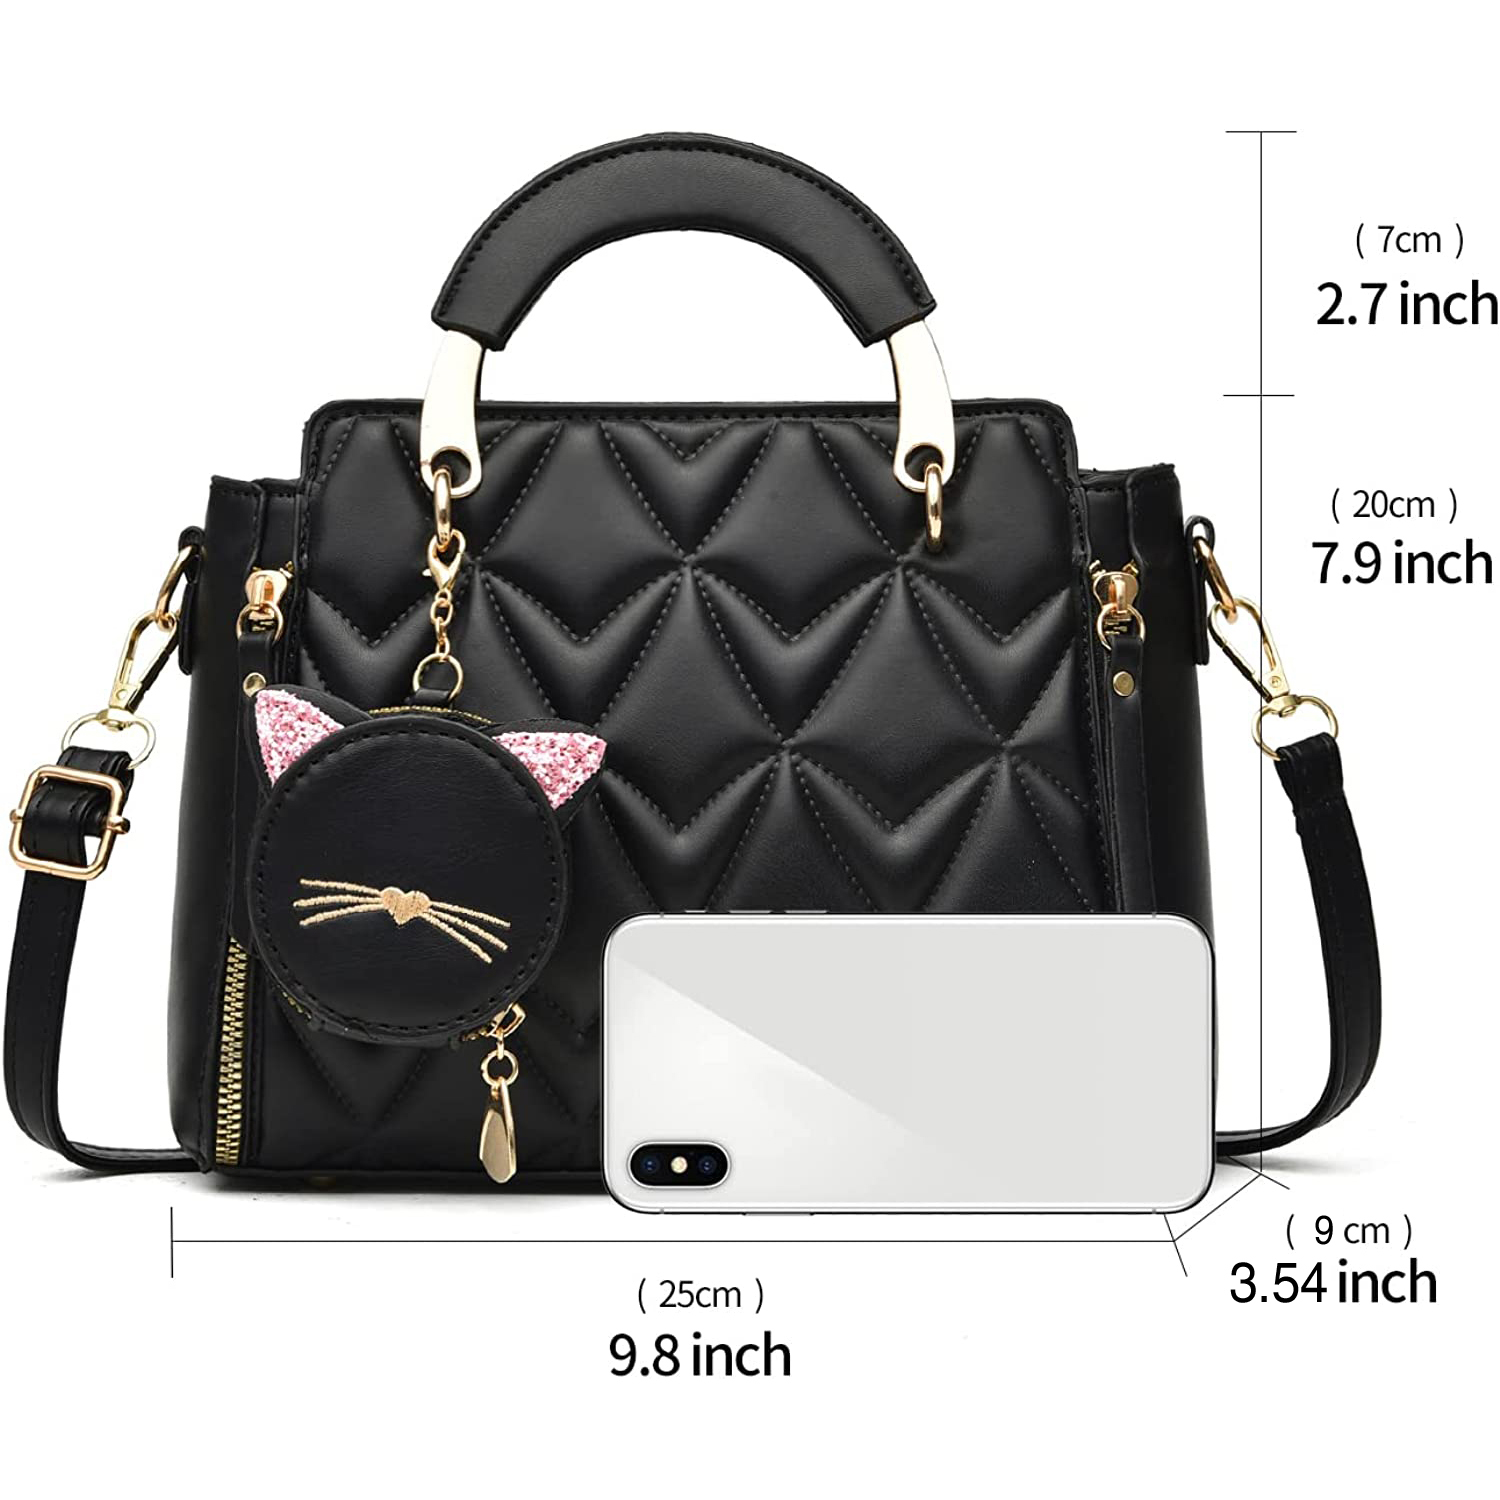 Large Purses for Women Shoulder Handbags Large Crossbody Cute Bag for Women with Small Purses,Black - image 3 of 9